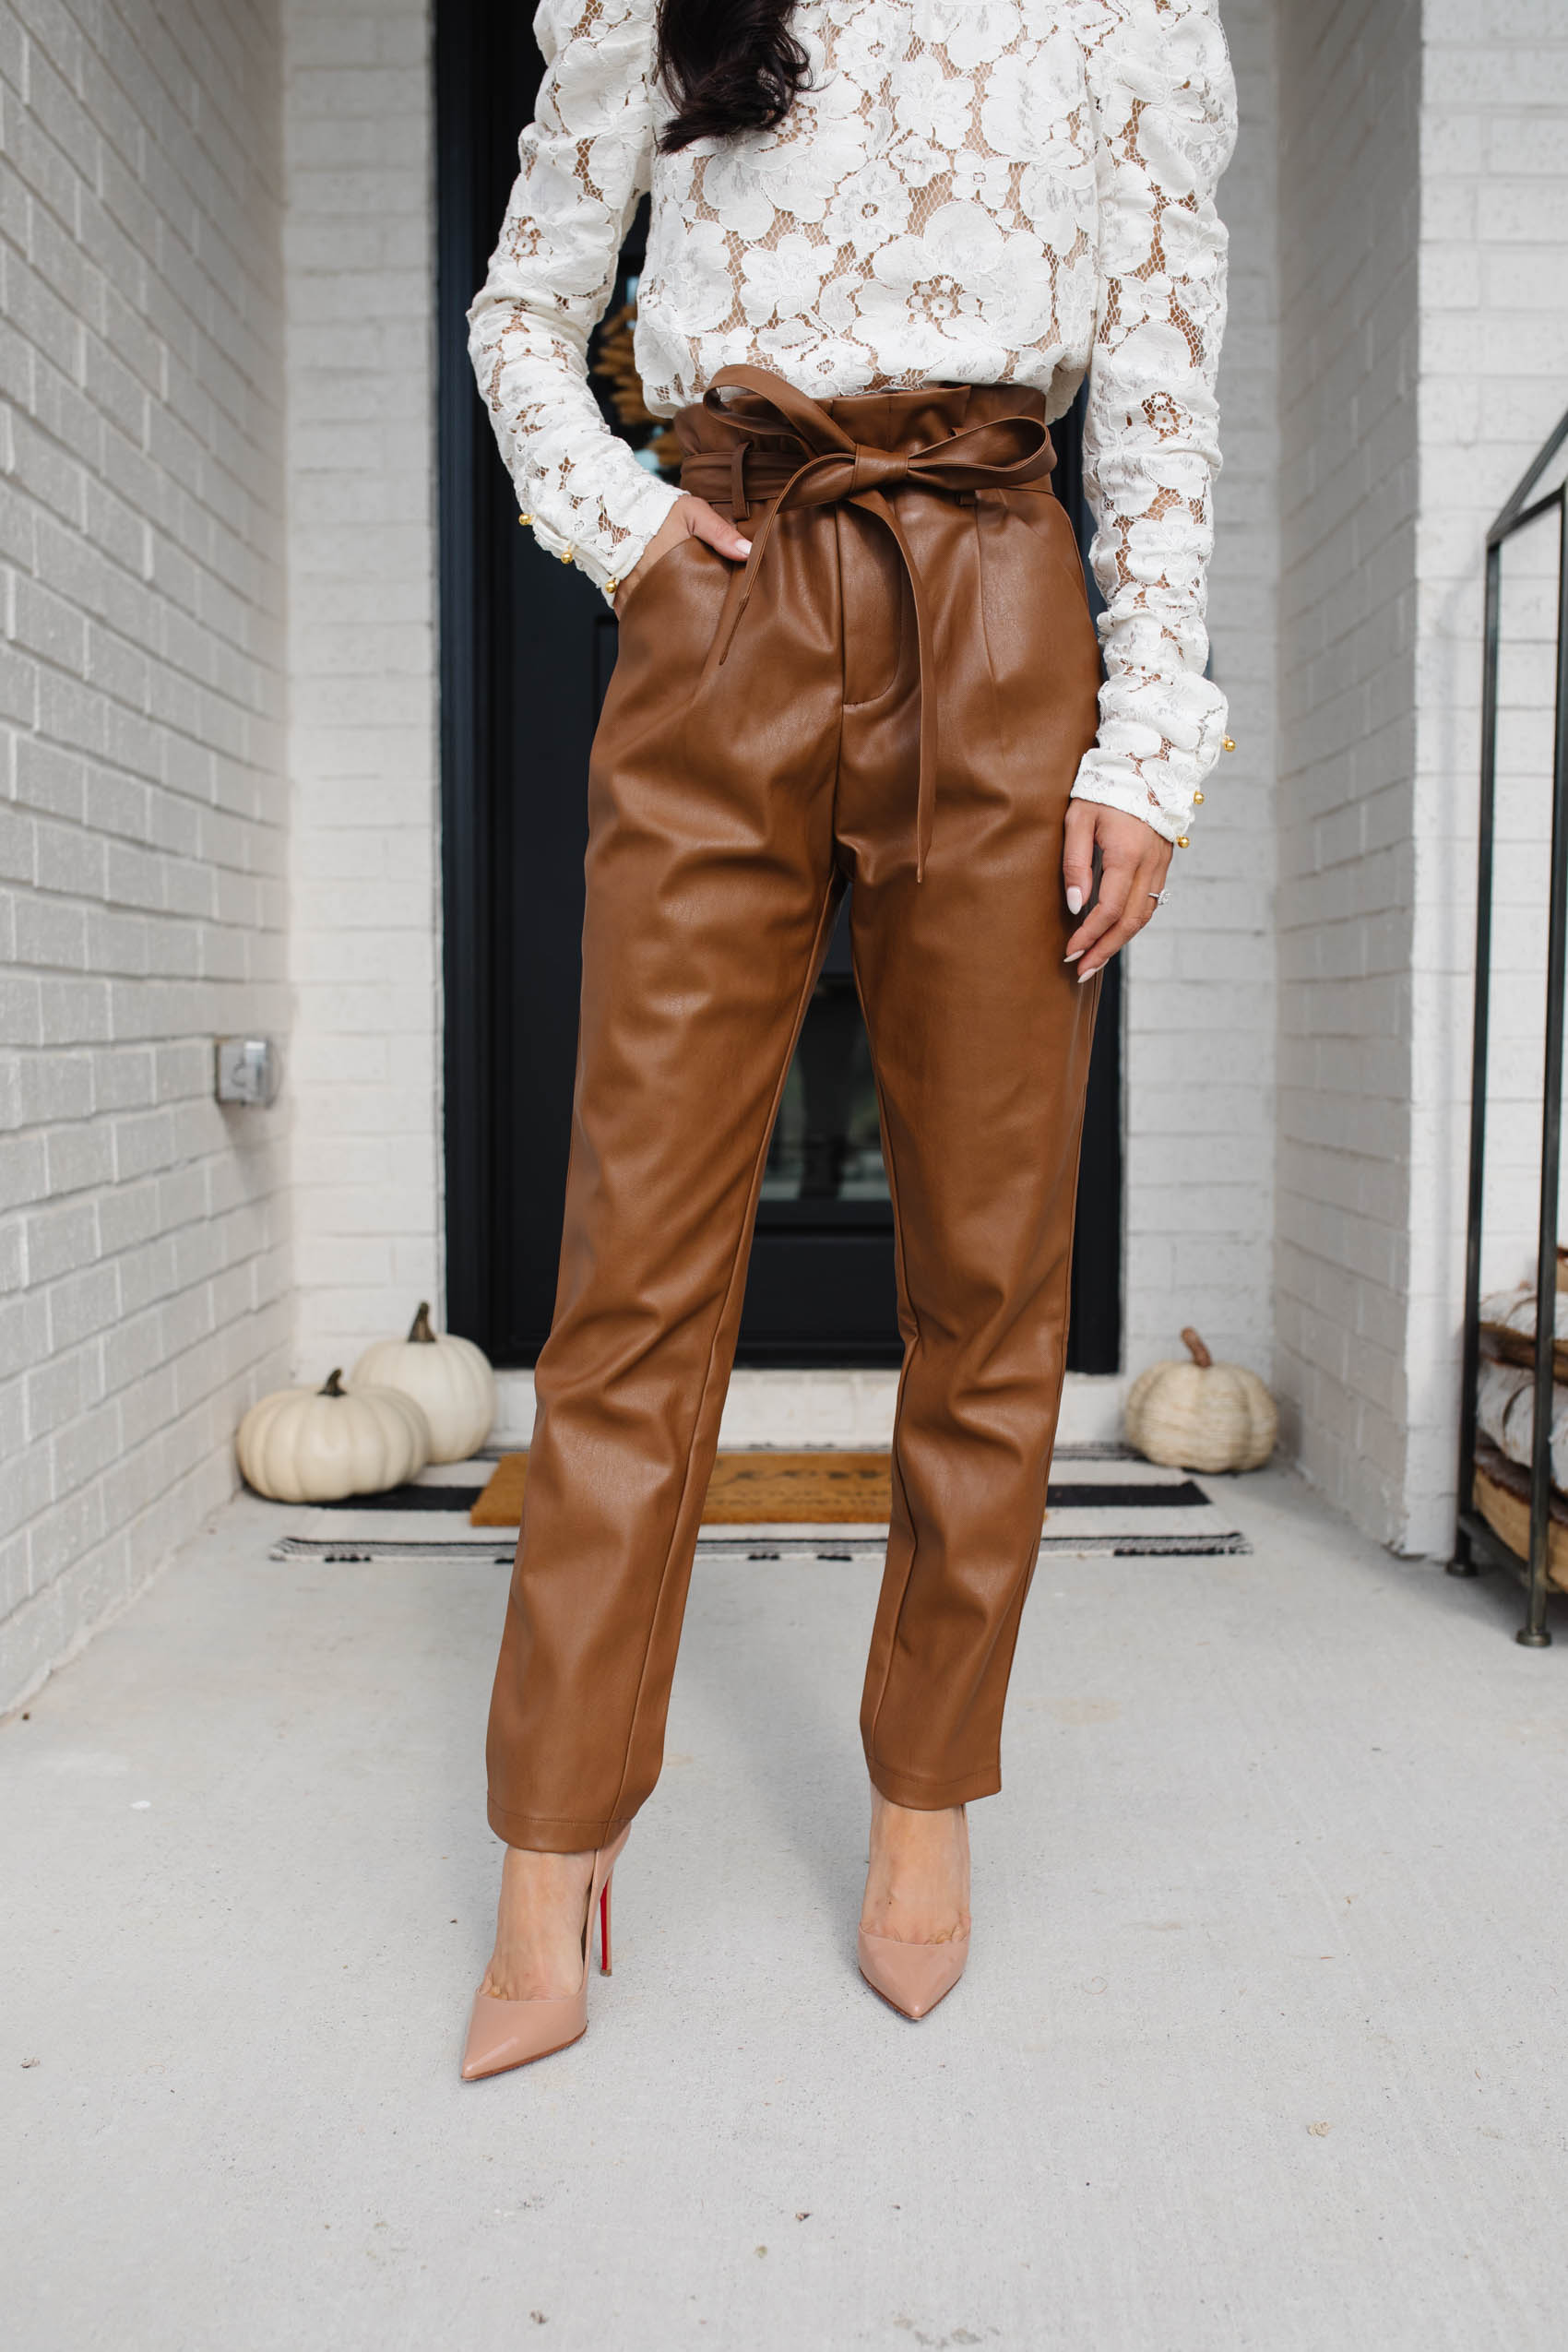 Blogger Hoang-Kim wears tie-waist leather pants with a lace blouse for a fall workwear outfit